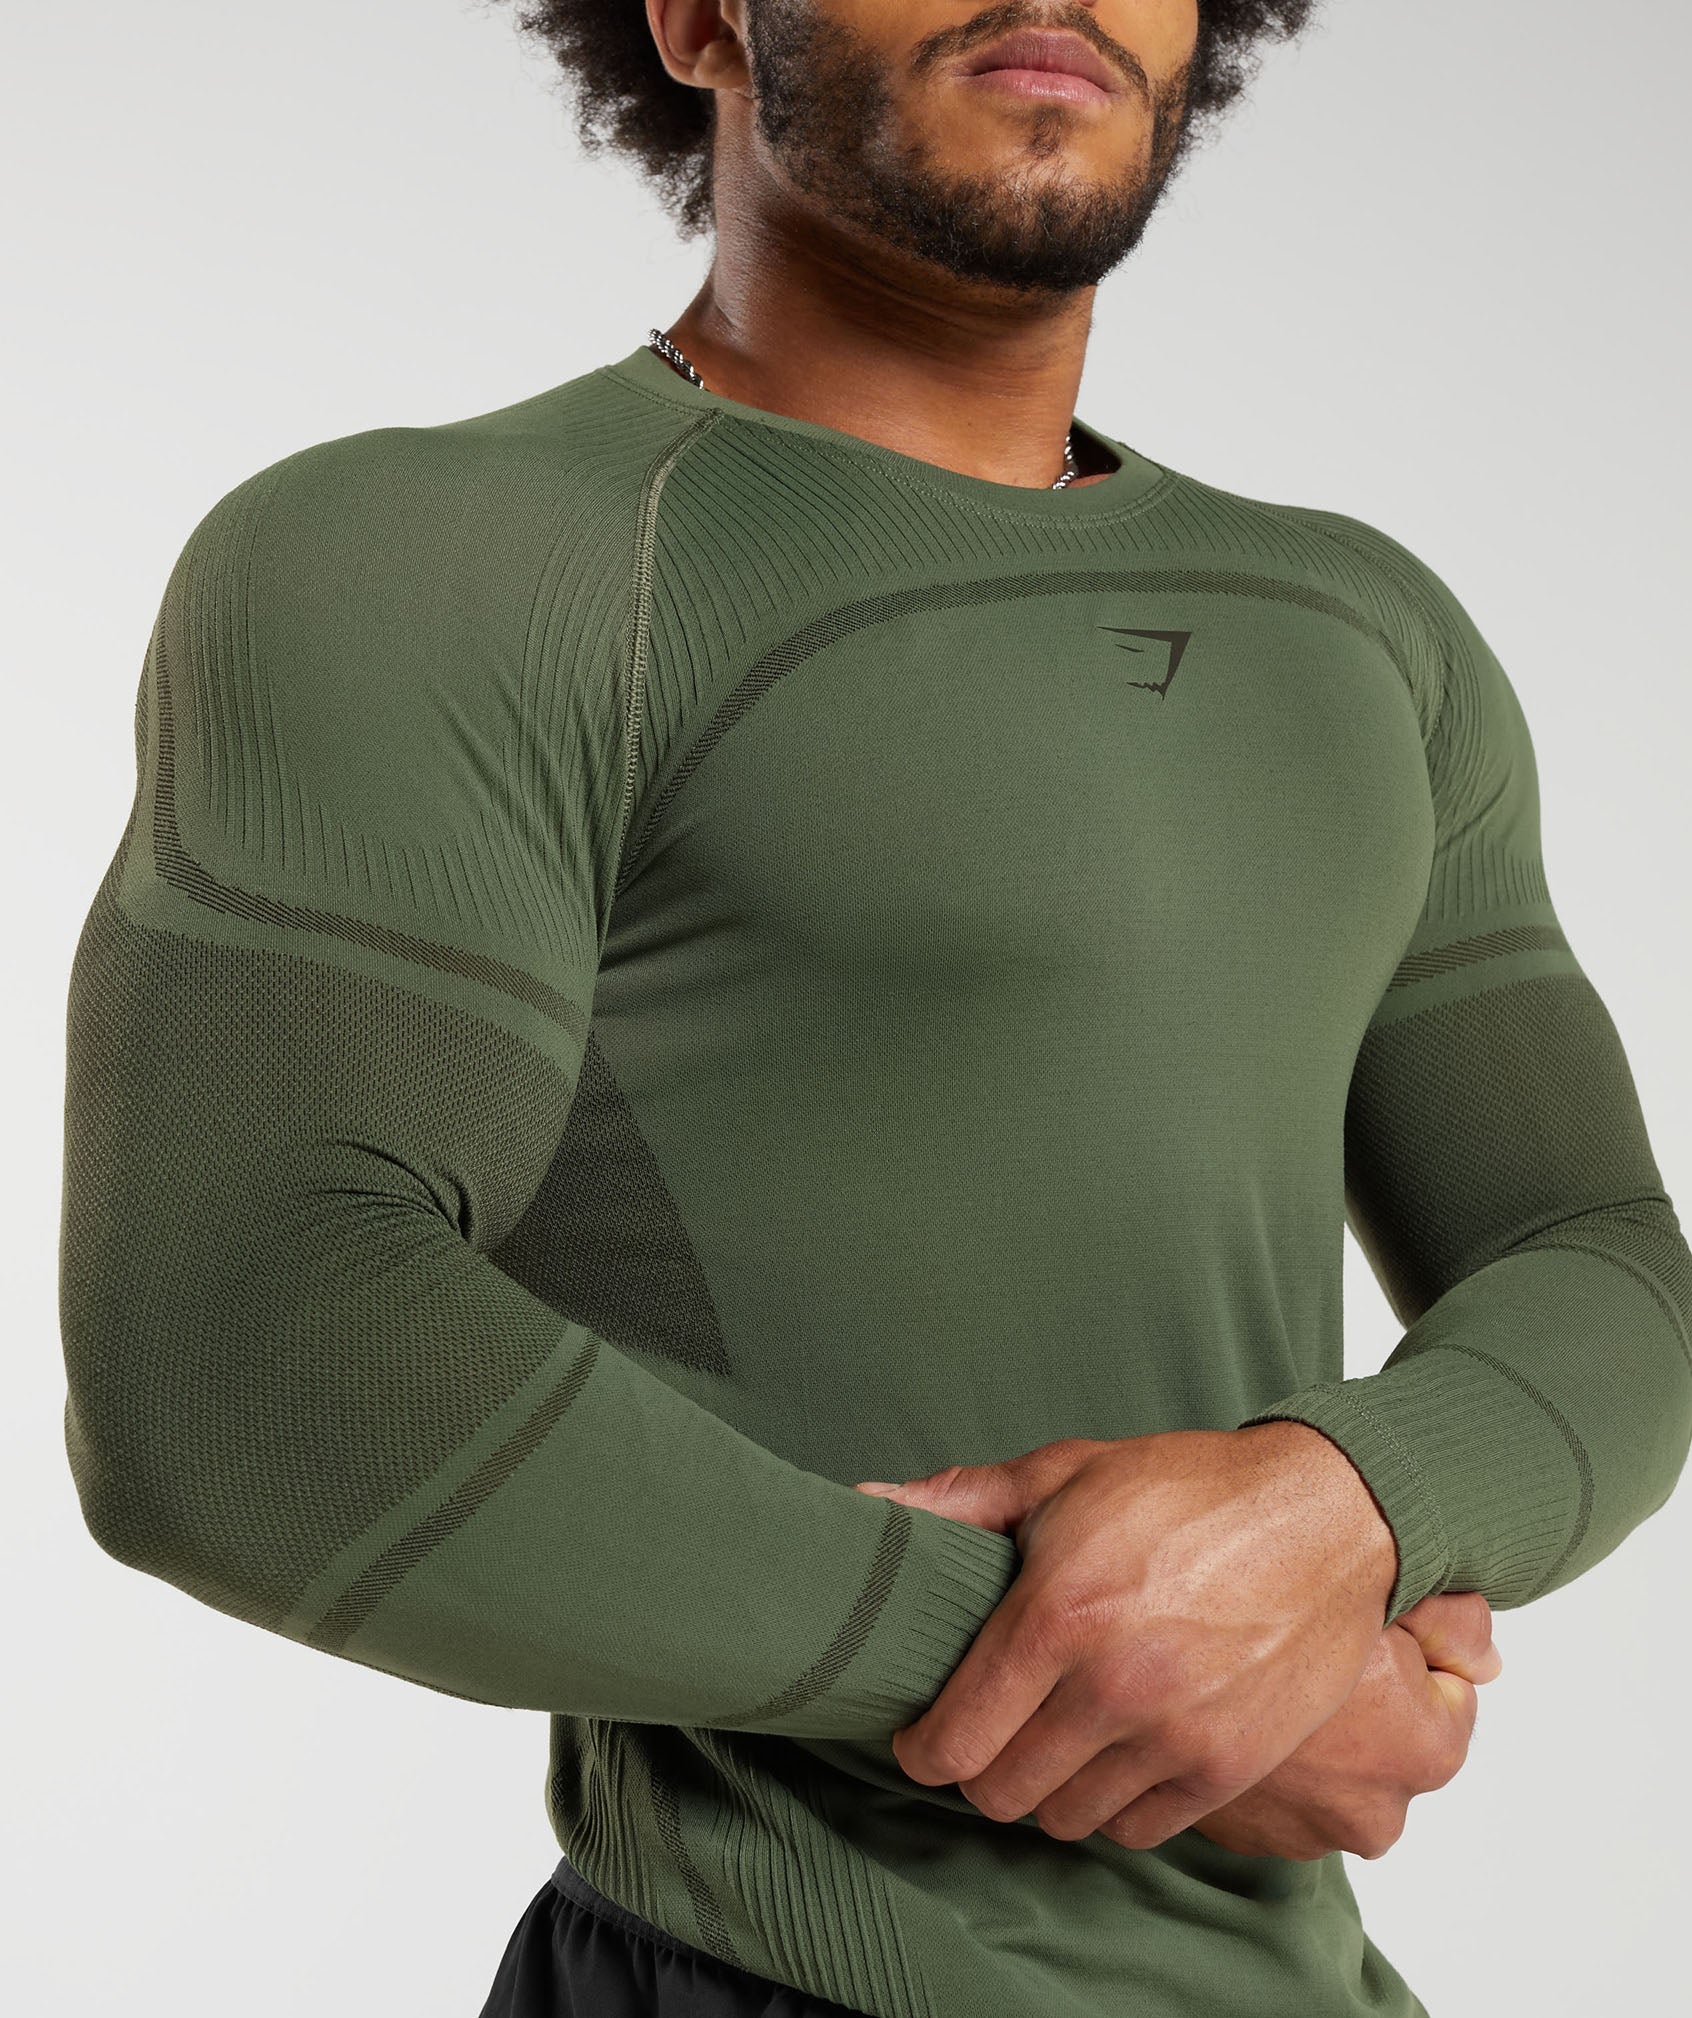 315 Seamless Long Sleeve T-Shirt in Core Olive/Deep Olive Green - view 6